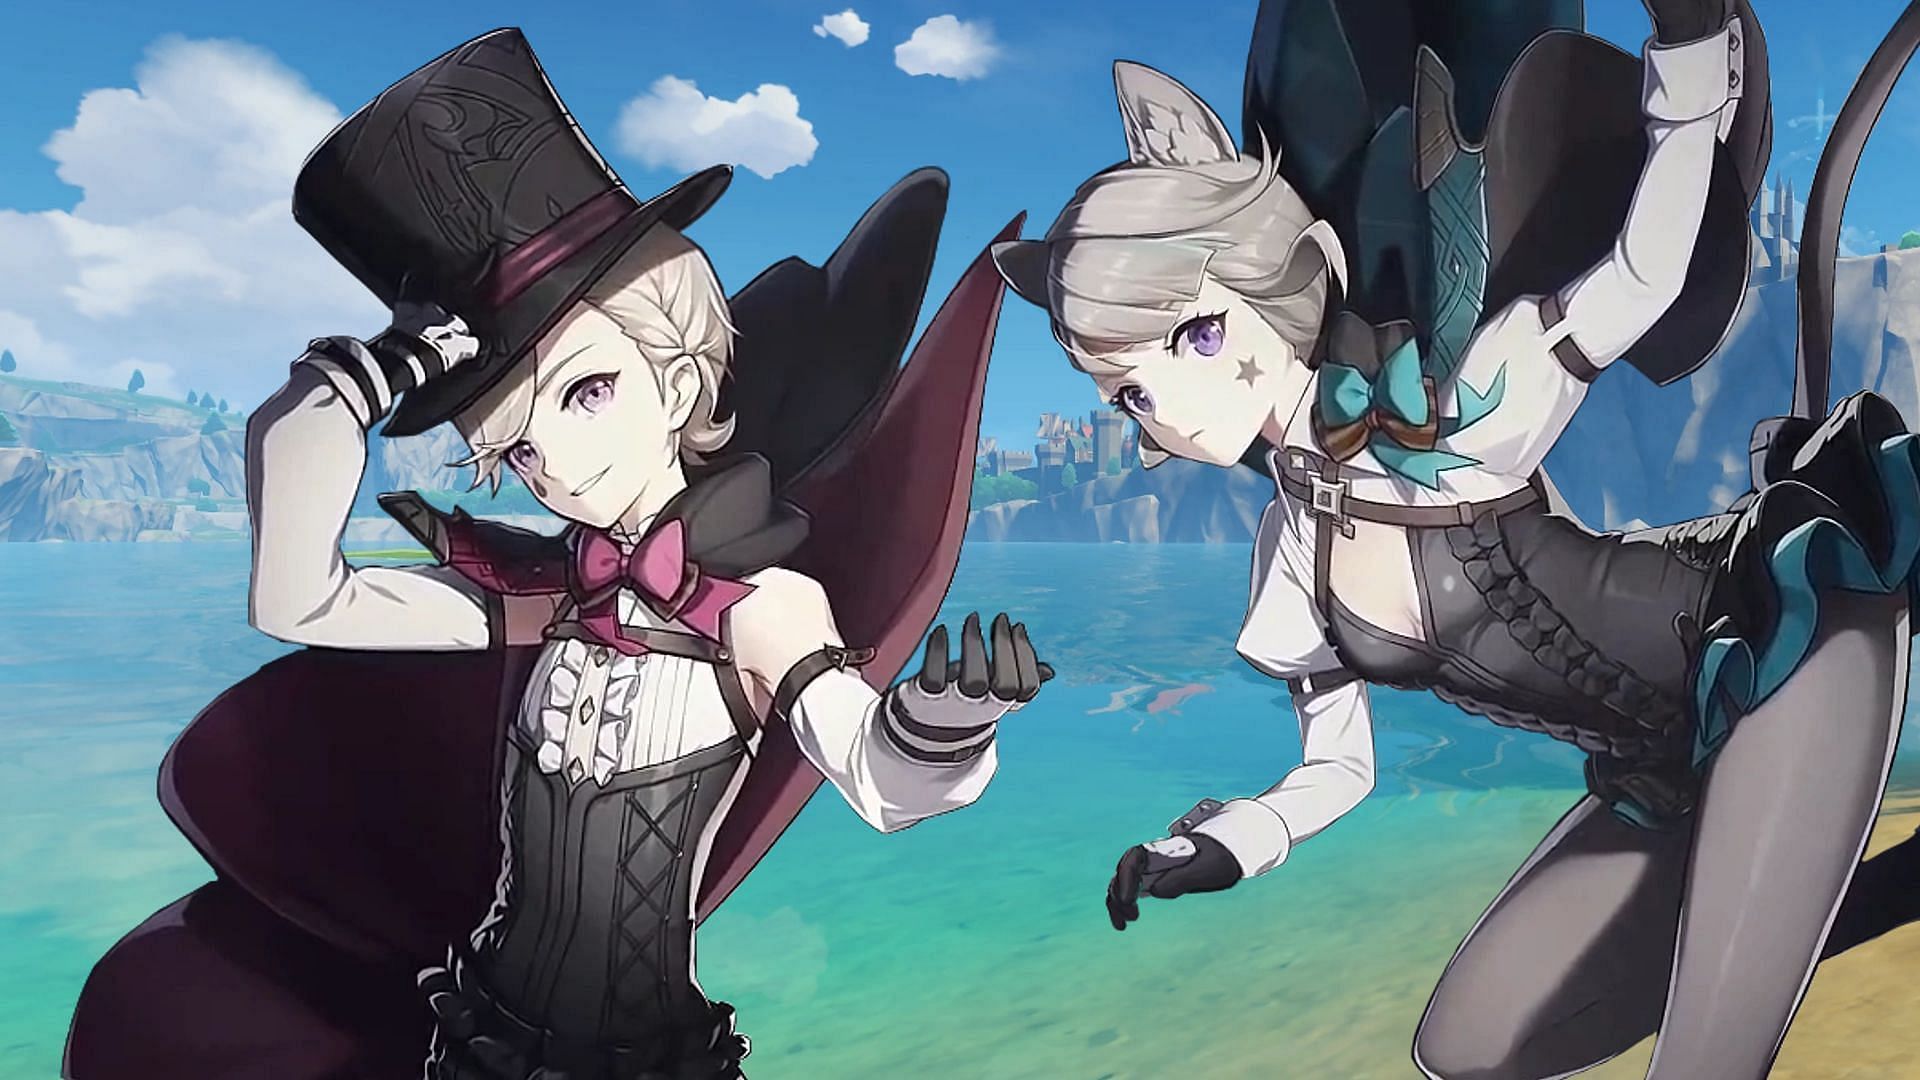 The official Teyvat preview showed off Lyney and Lynette back in 2020 (Image via HoYoverse)